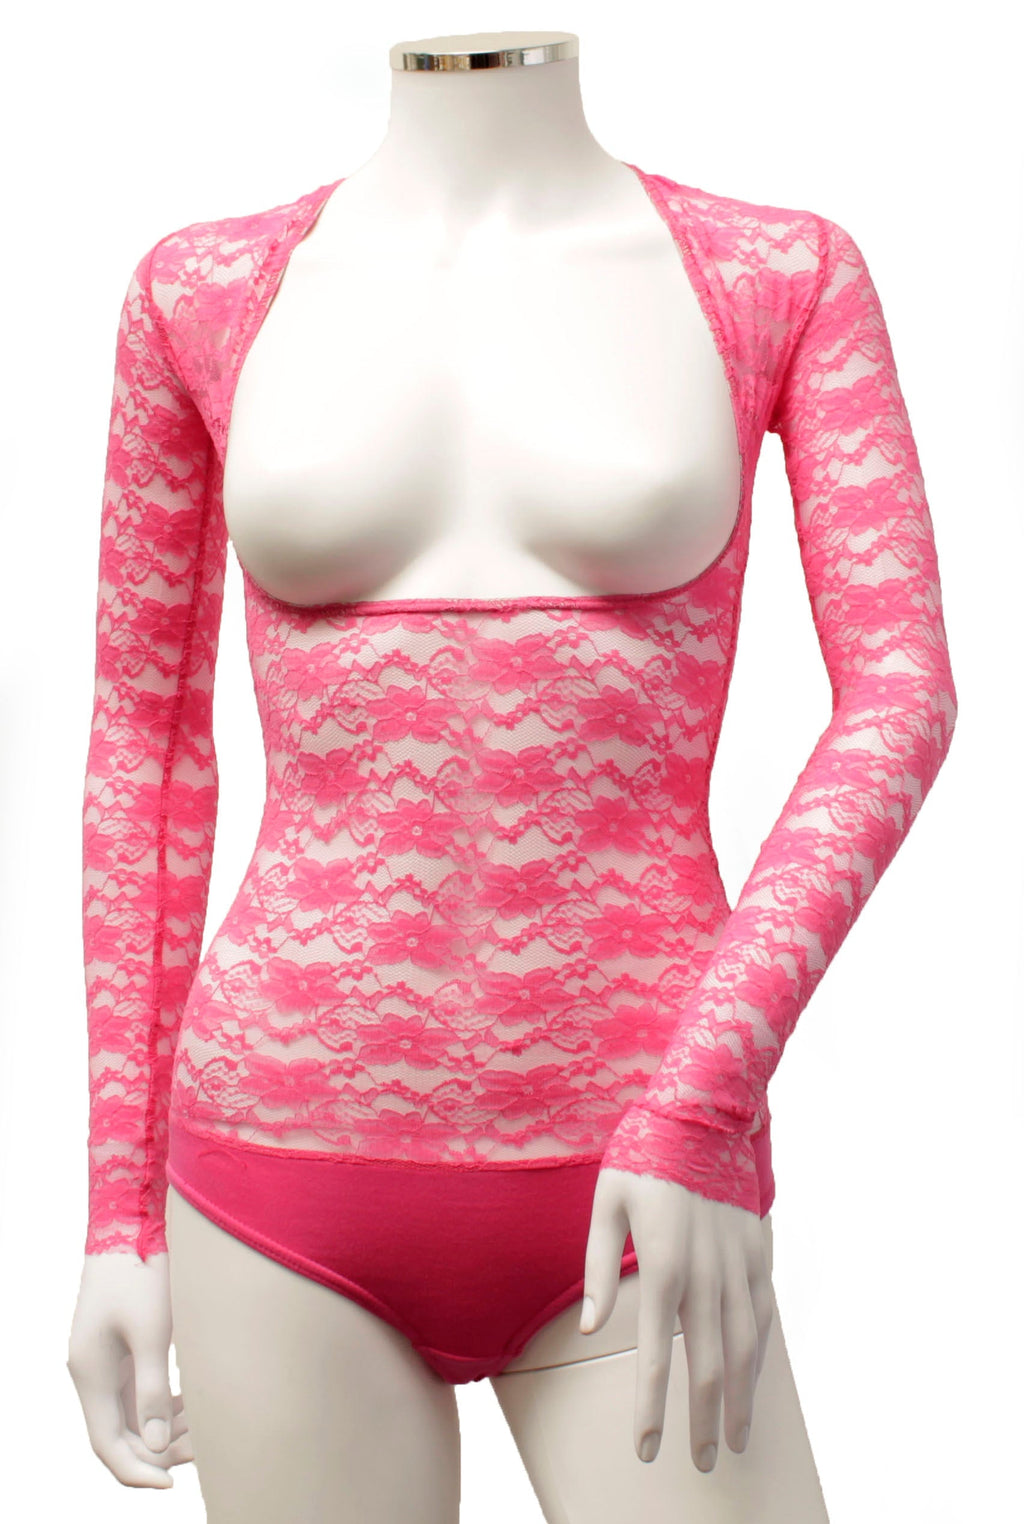 Seconds - Underbust with Sleeves - Pink Lace